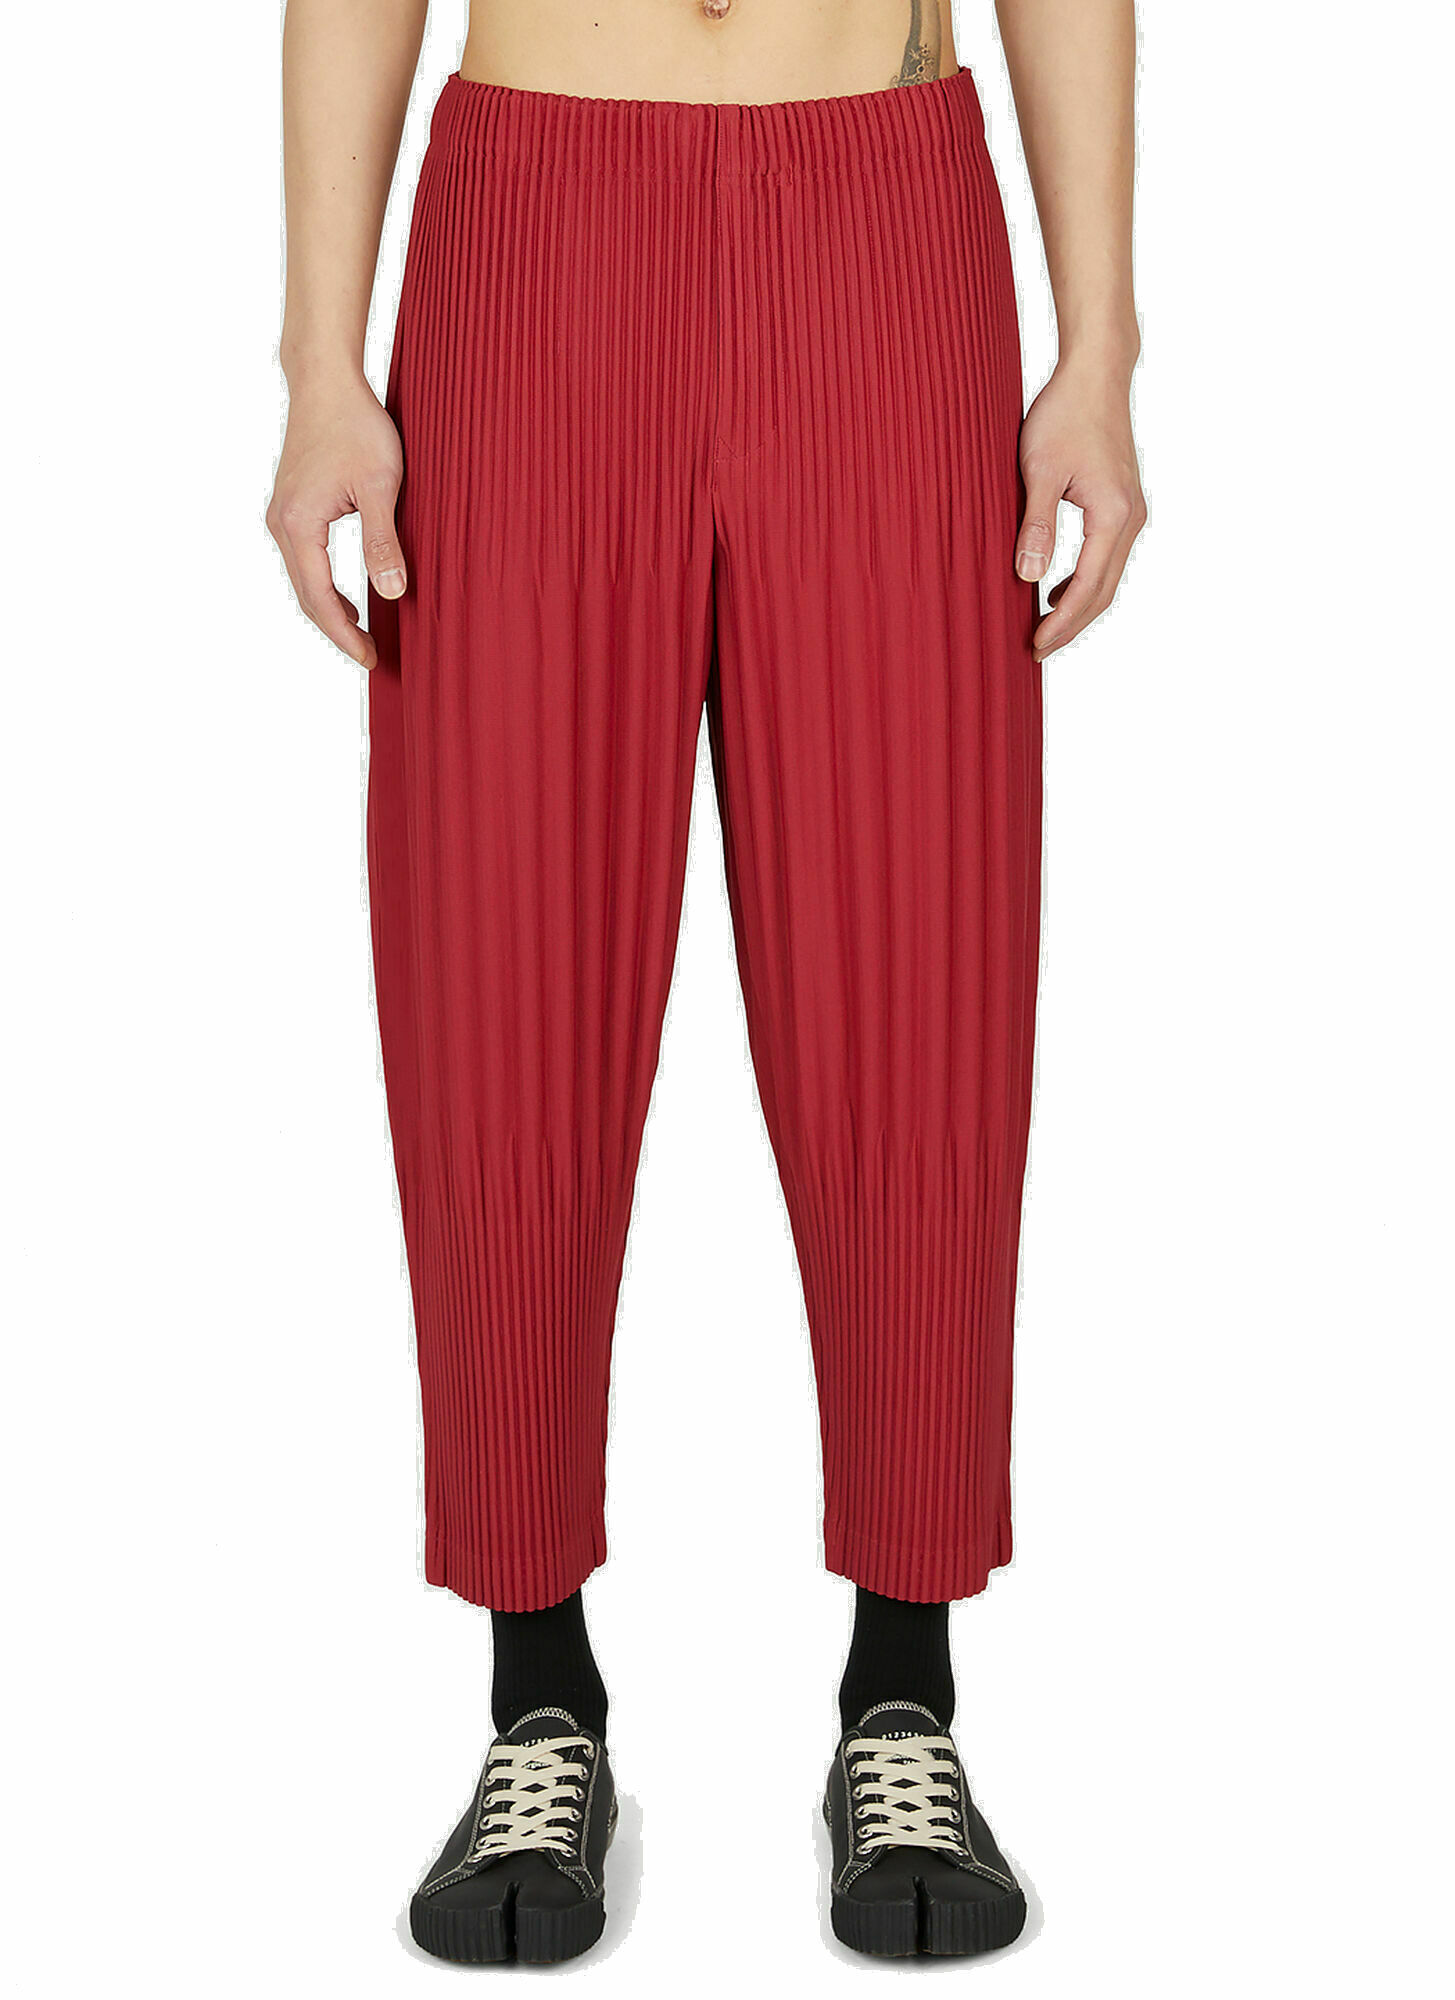 Homme Plissé Issey Miyake - Tapered Pants in Red Homme Plisse Issey Miyake